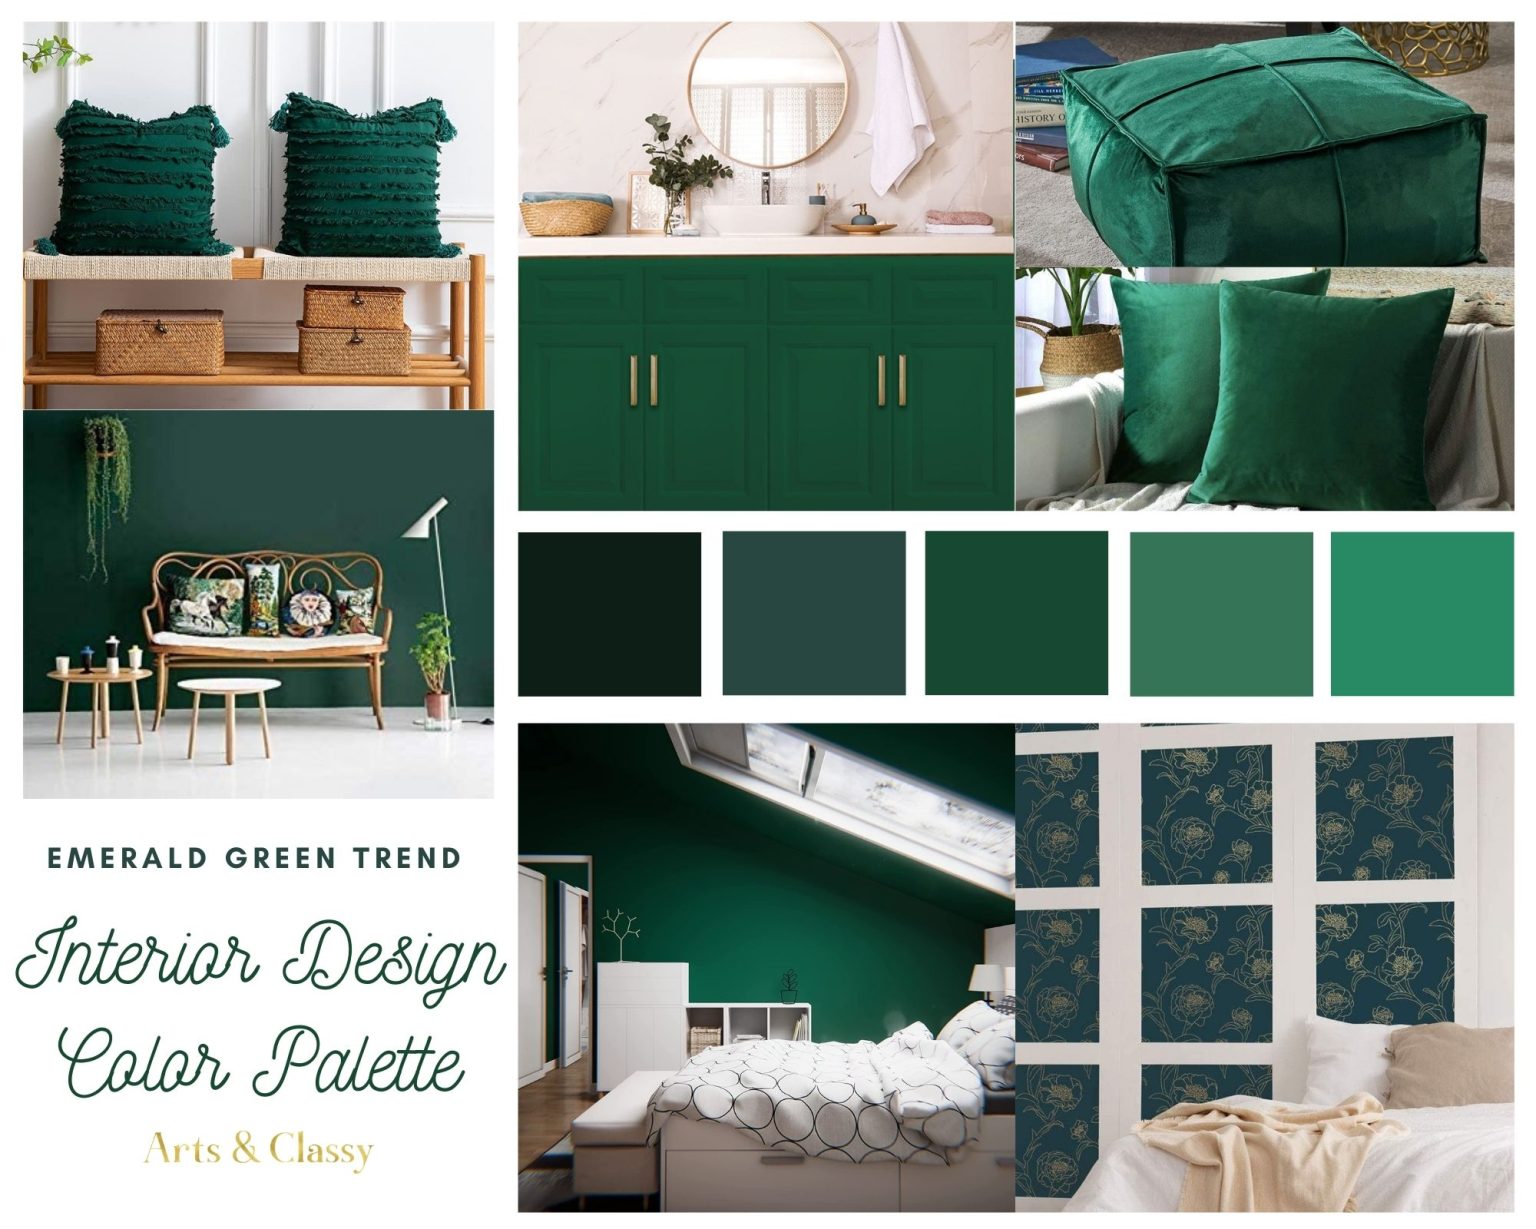 7 Ways to Incorporate Emerald Green Room Ideas into Your Home Design ...